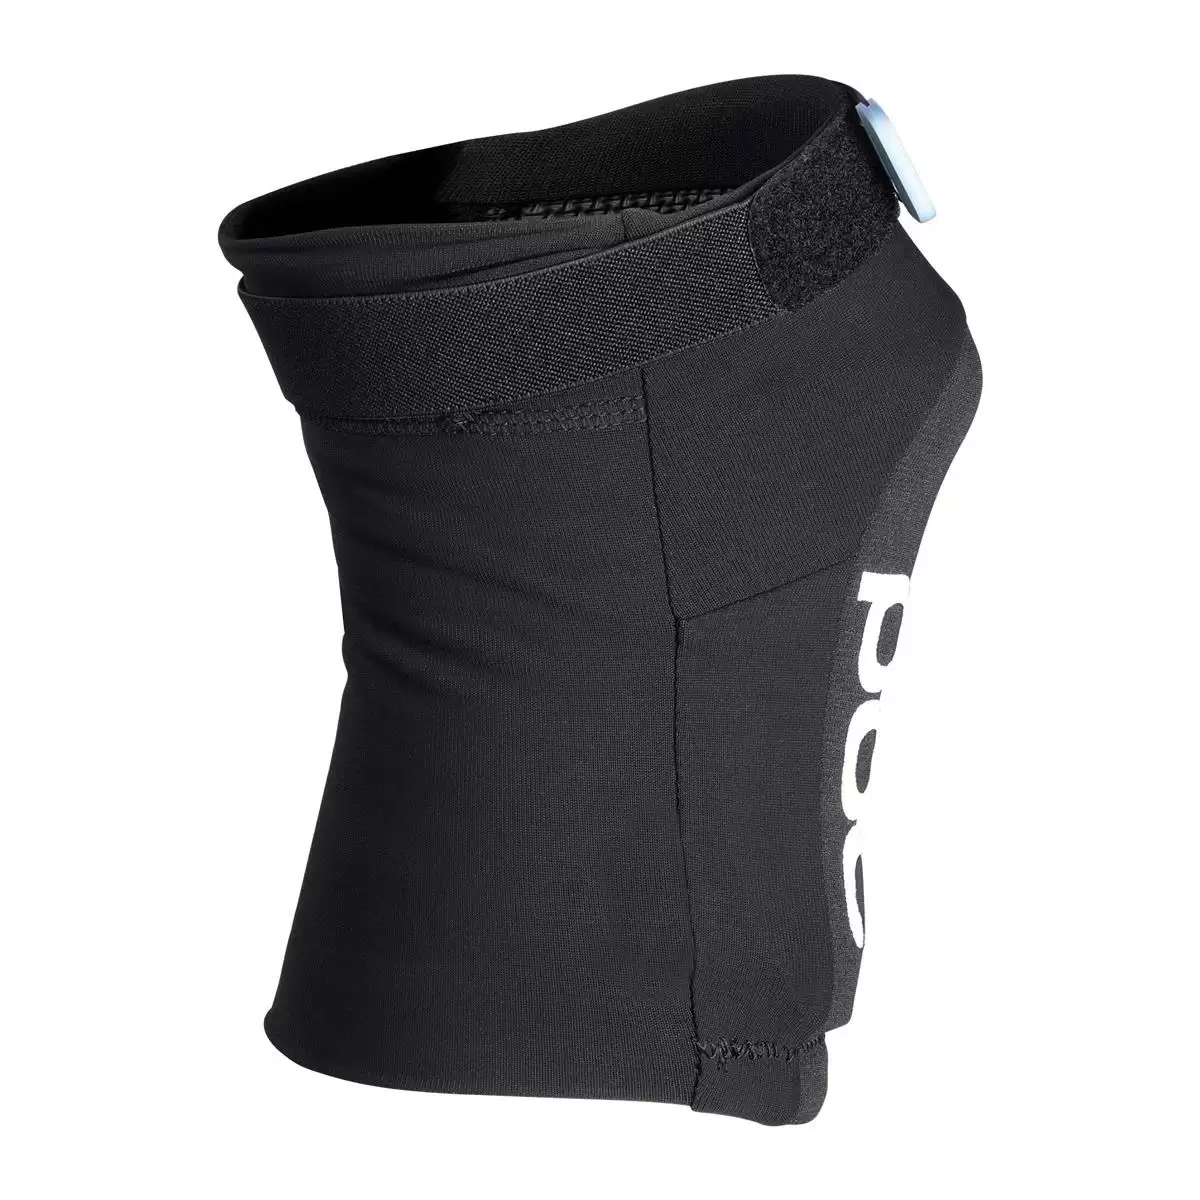 Joint VPD Air Knee pads black Size M #2